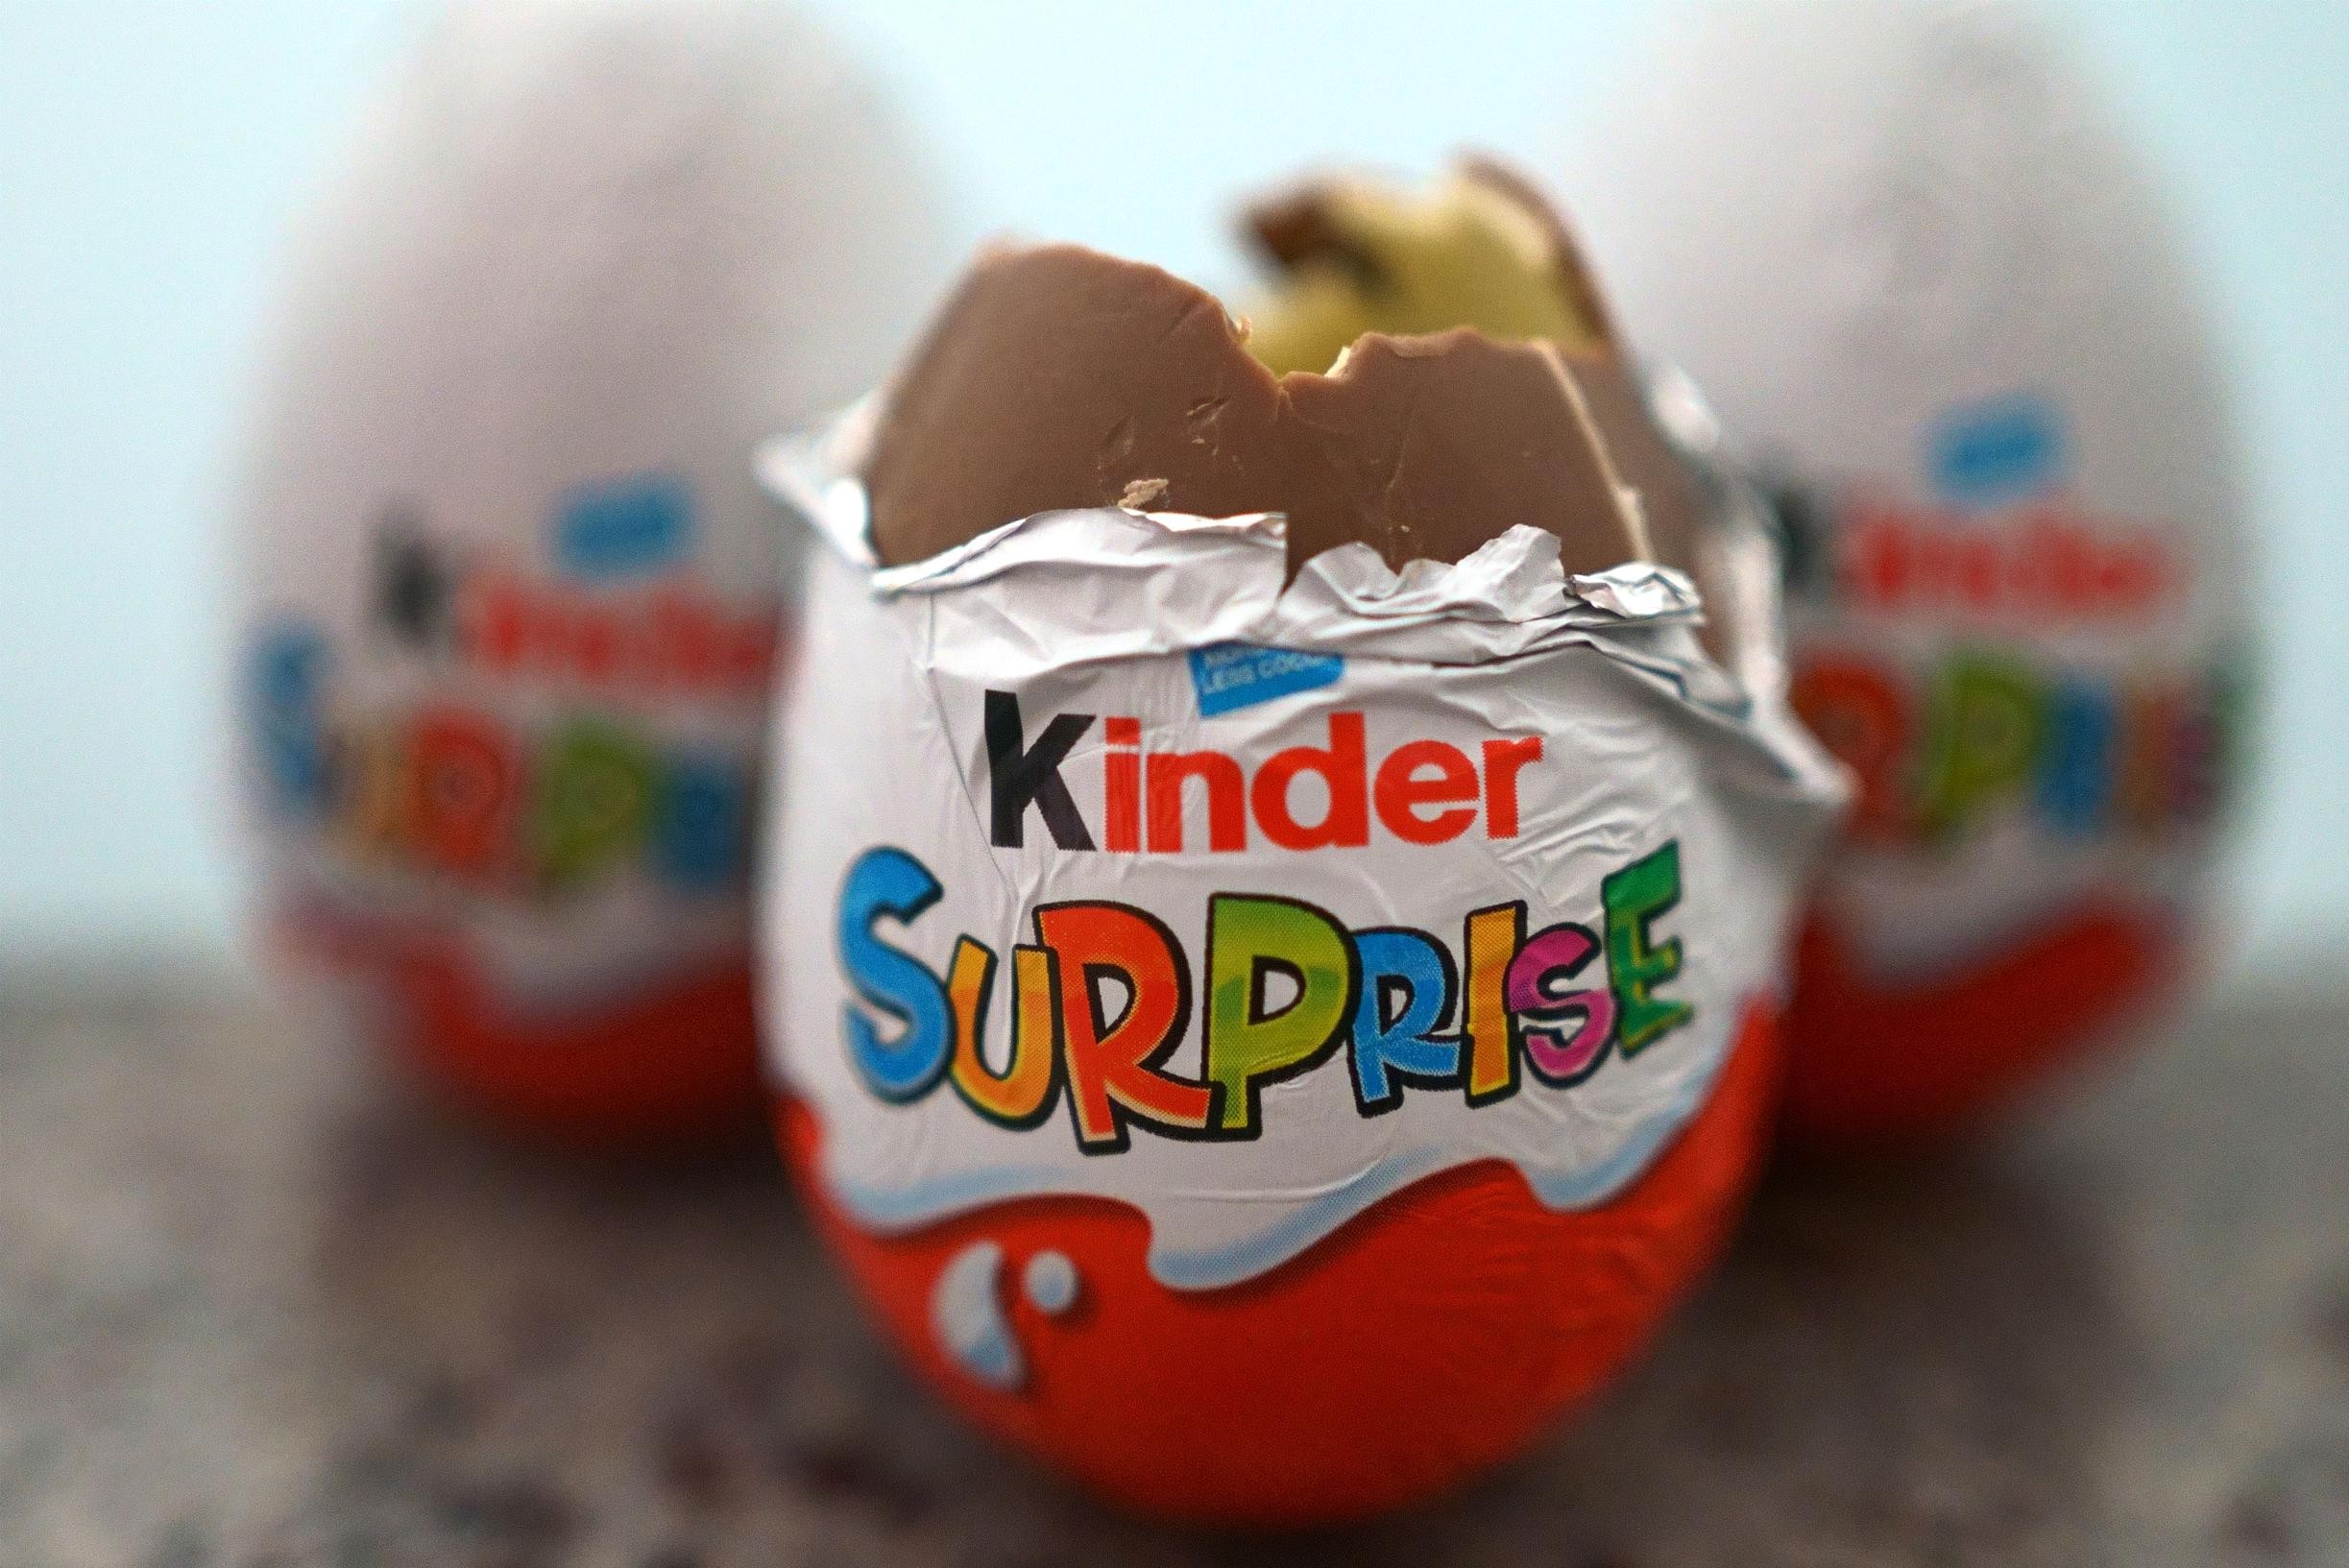 Ferrero now removes Kinder products from US shelves